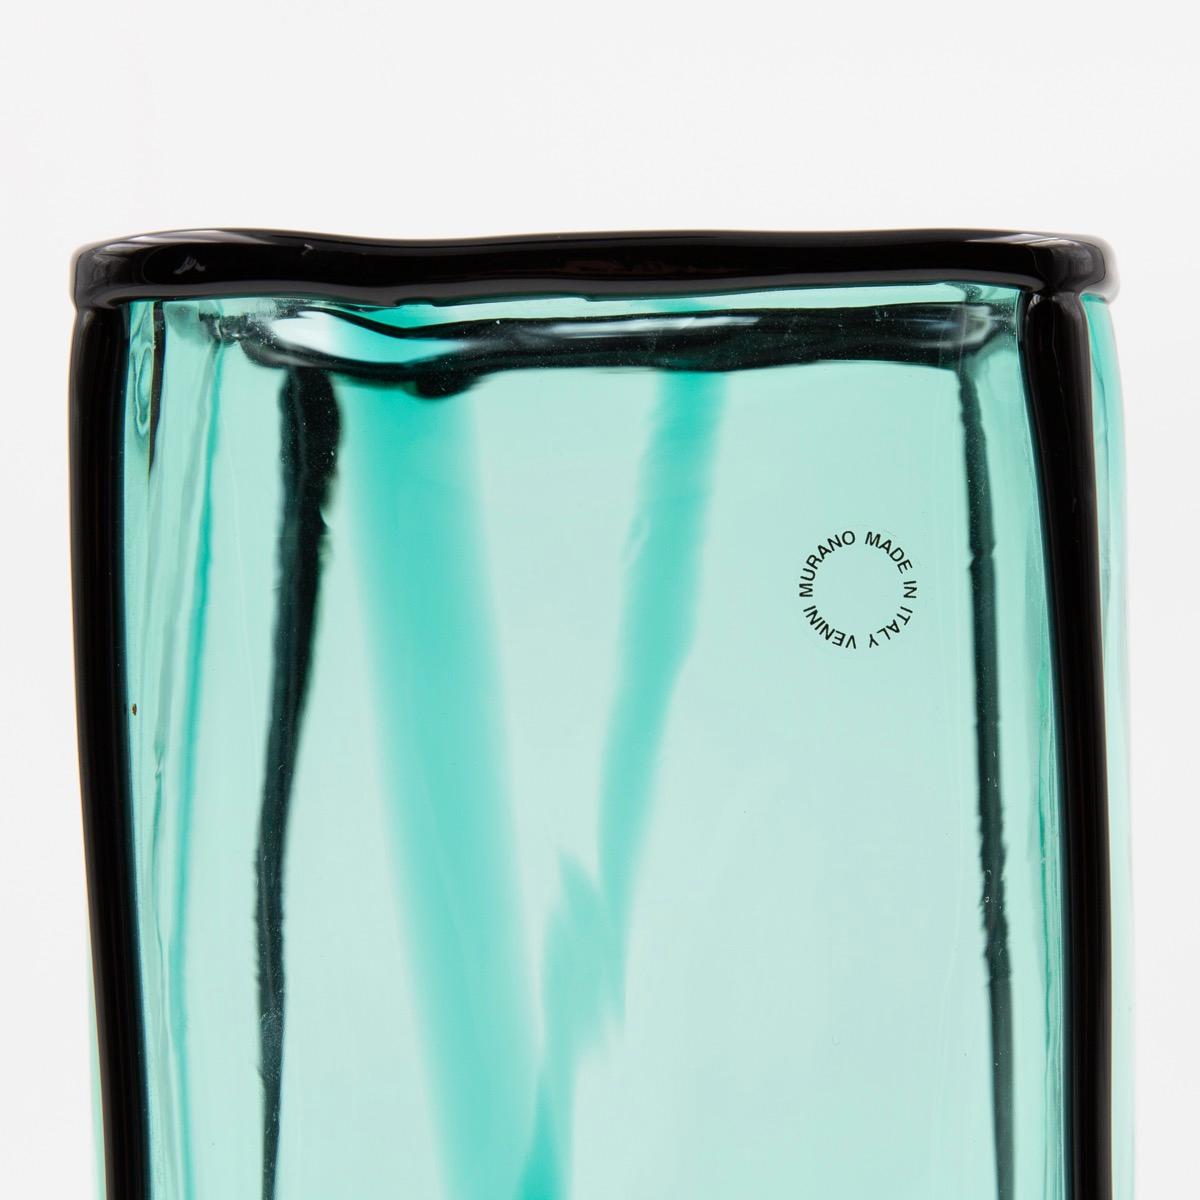 Epipedos is the result of the last series of vases designed by Fulvio Bianconi for Venini at the end of the 80s.It is a large vase in hand-blown glass, geometrically shaped, the contours of which are highlighted with an application of black glass.